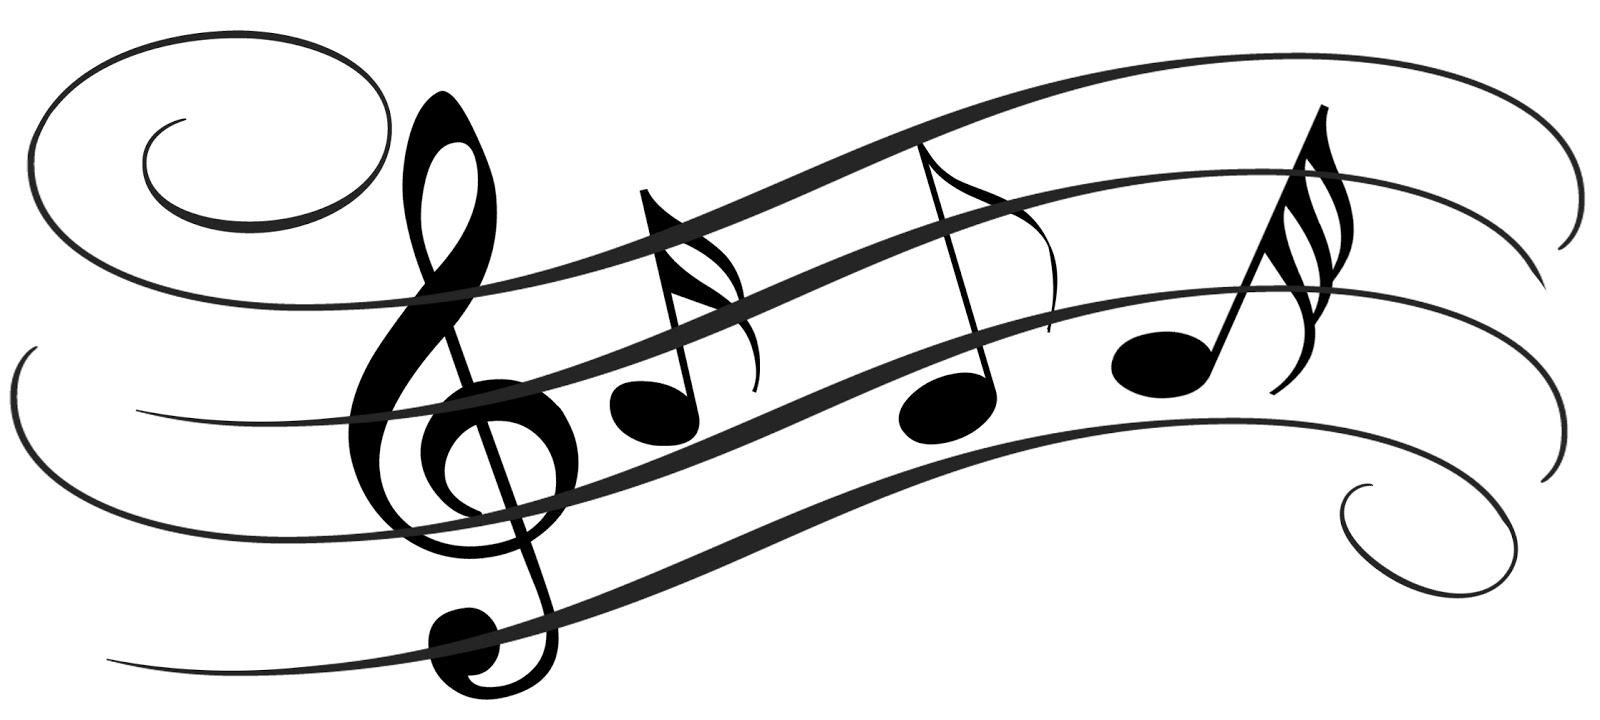 Piano notes clipart 